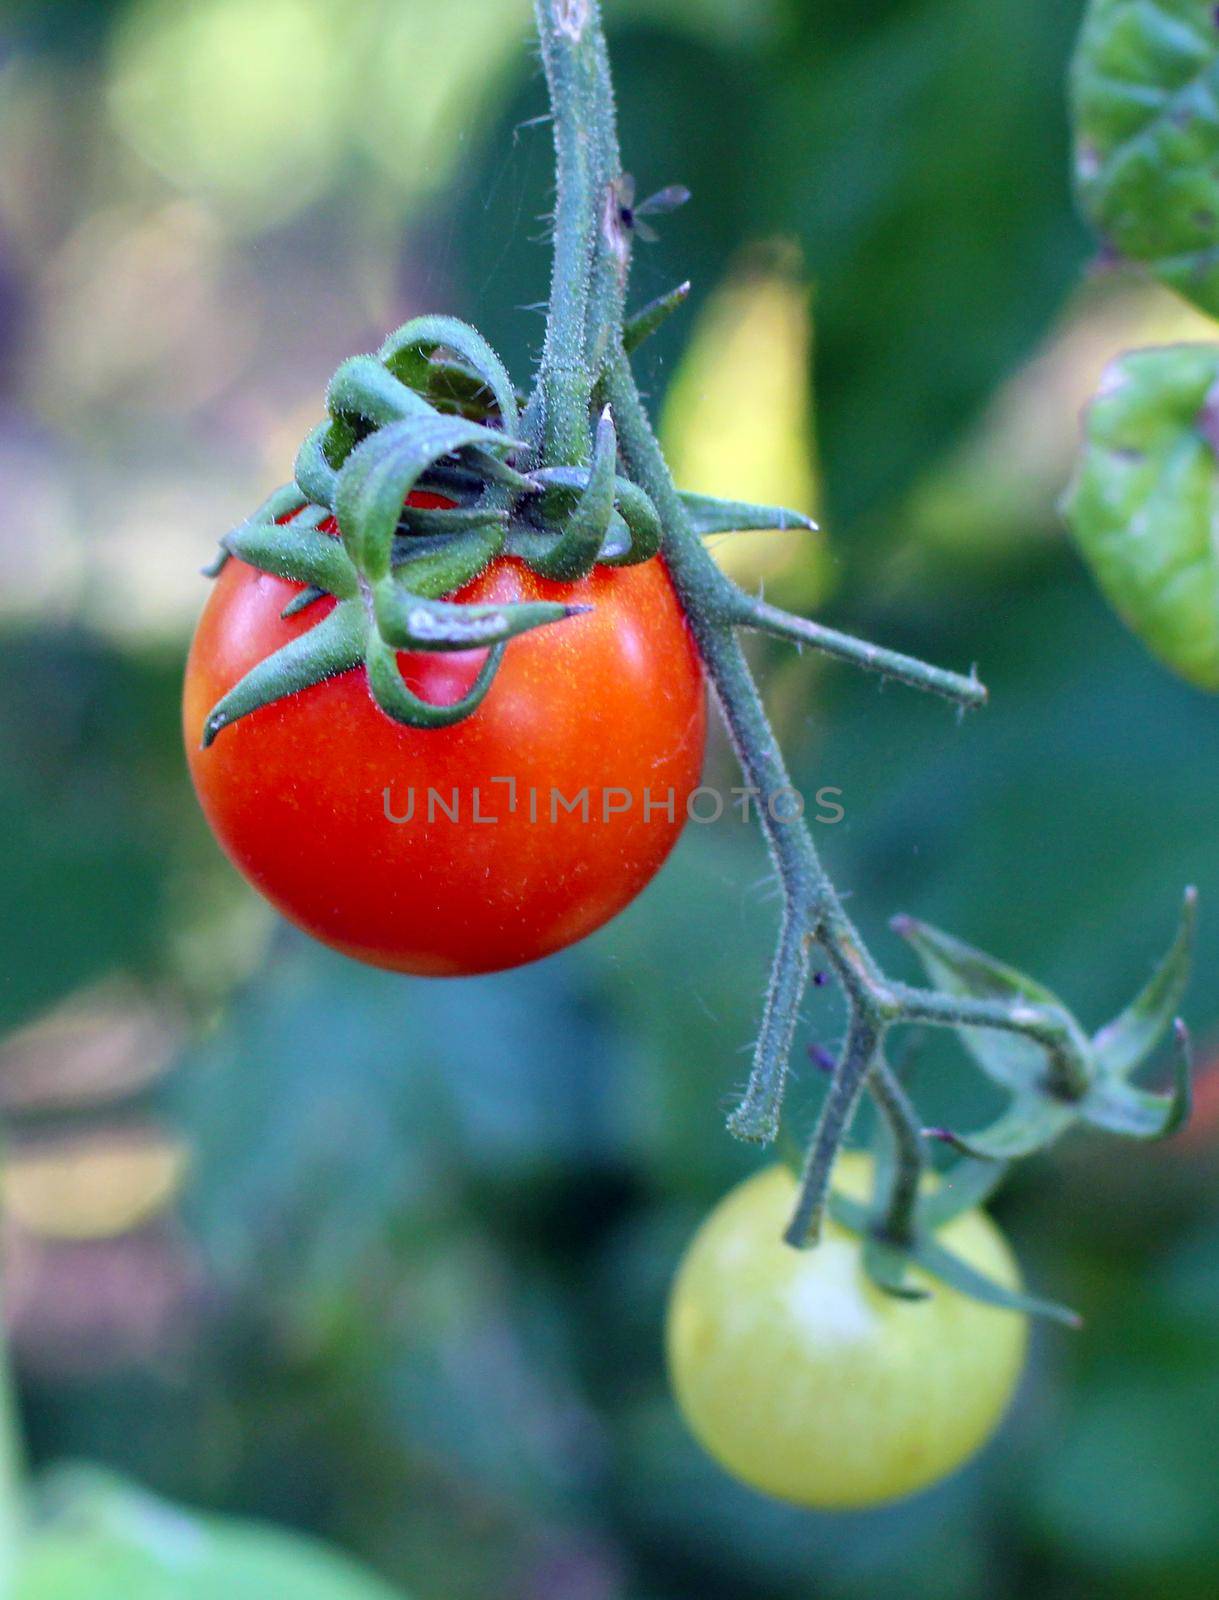 Home grown young tomato by Lirch